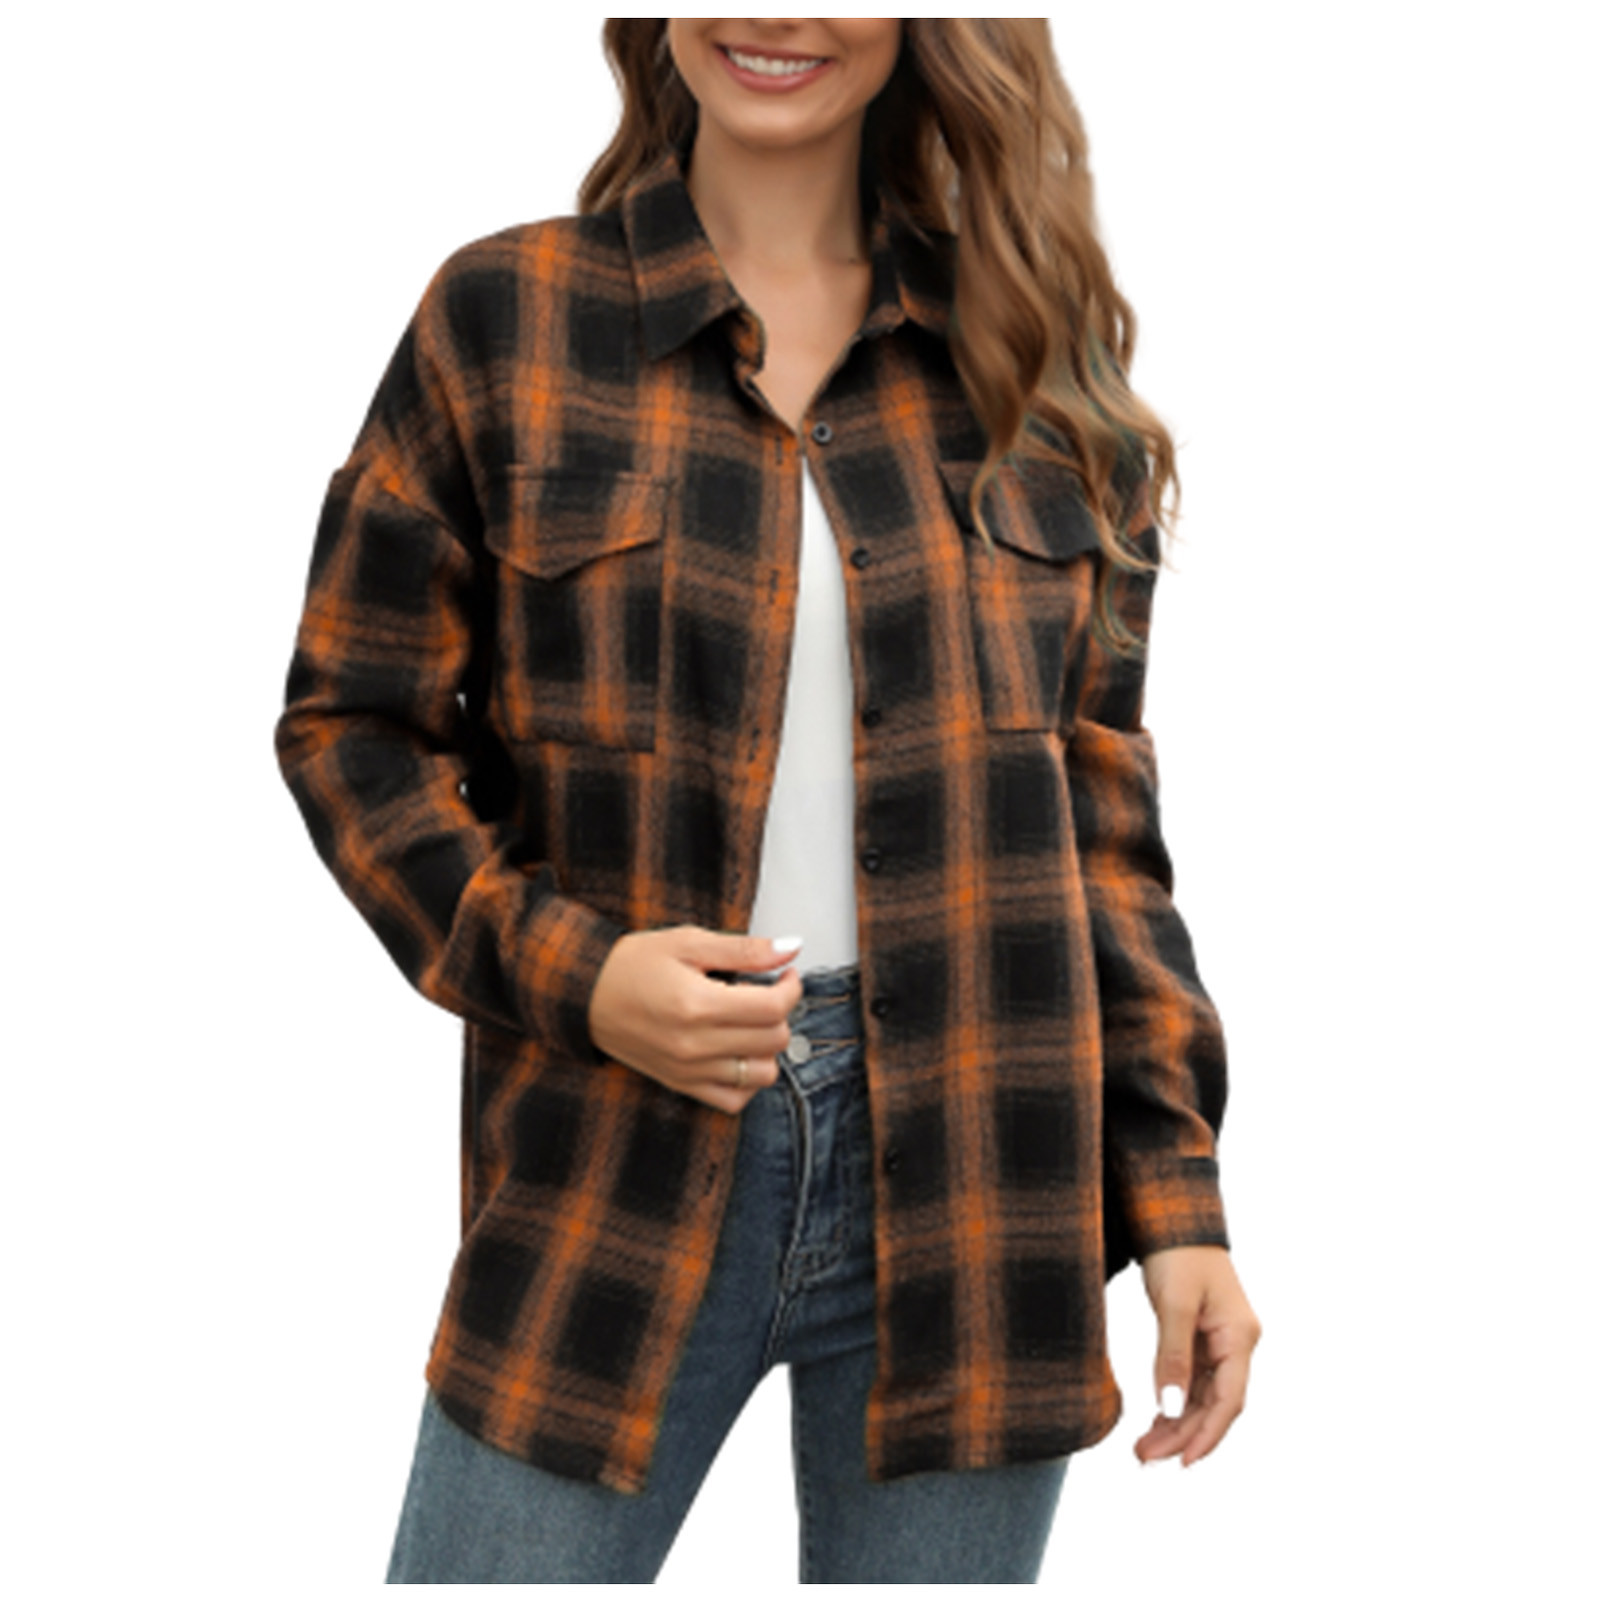 Black and Friday Deals Fall Jackets For Women Womens Lattice Printed Cardigan Top Lady Warm Coats Shirt Long Sleeve Outerwear Jacket Coat,Brown,Small - image 1 of 8